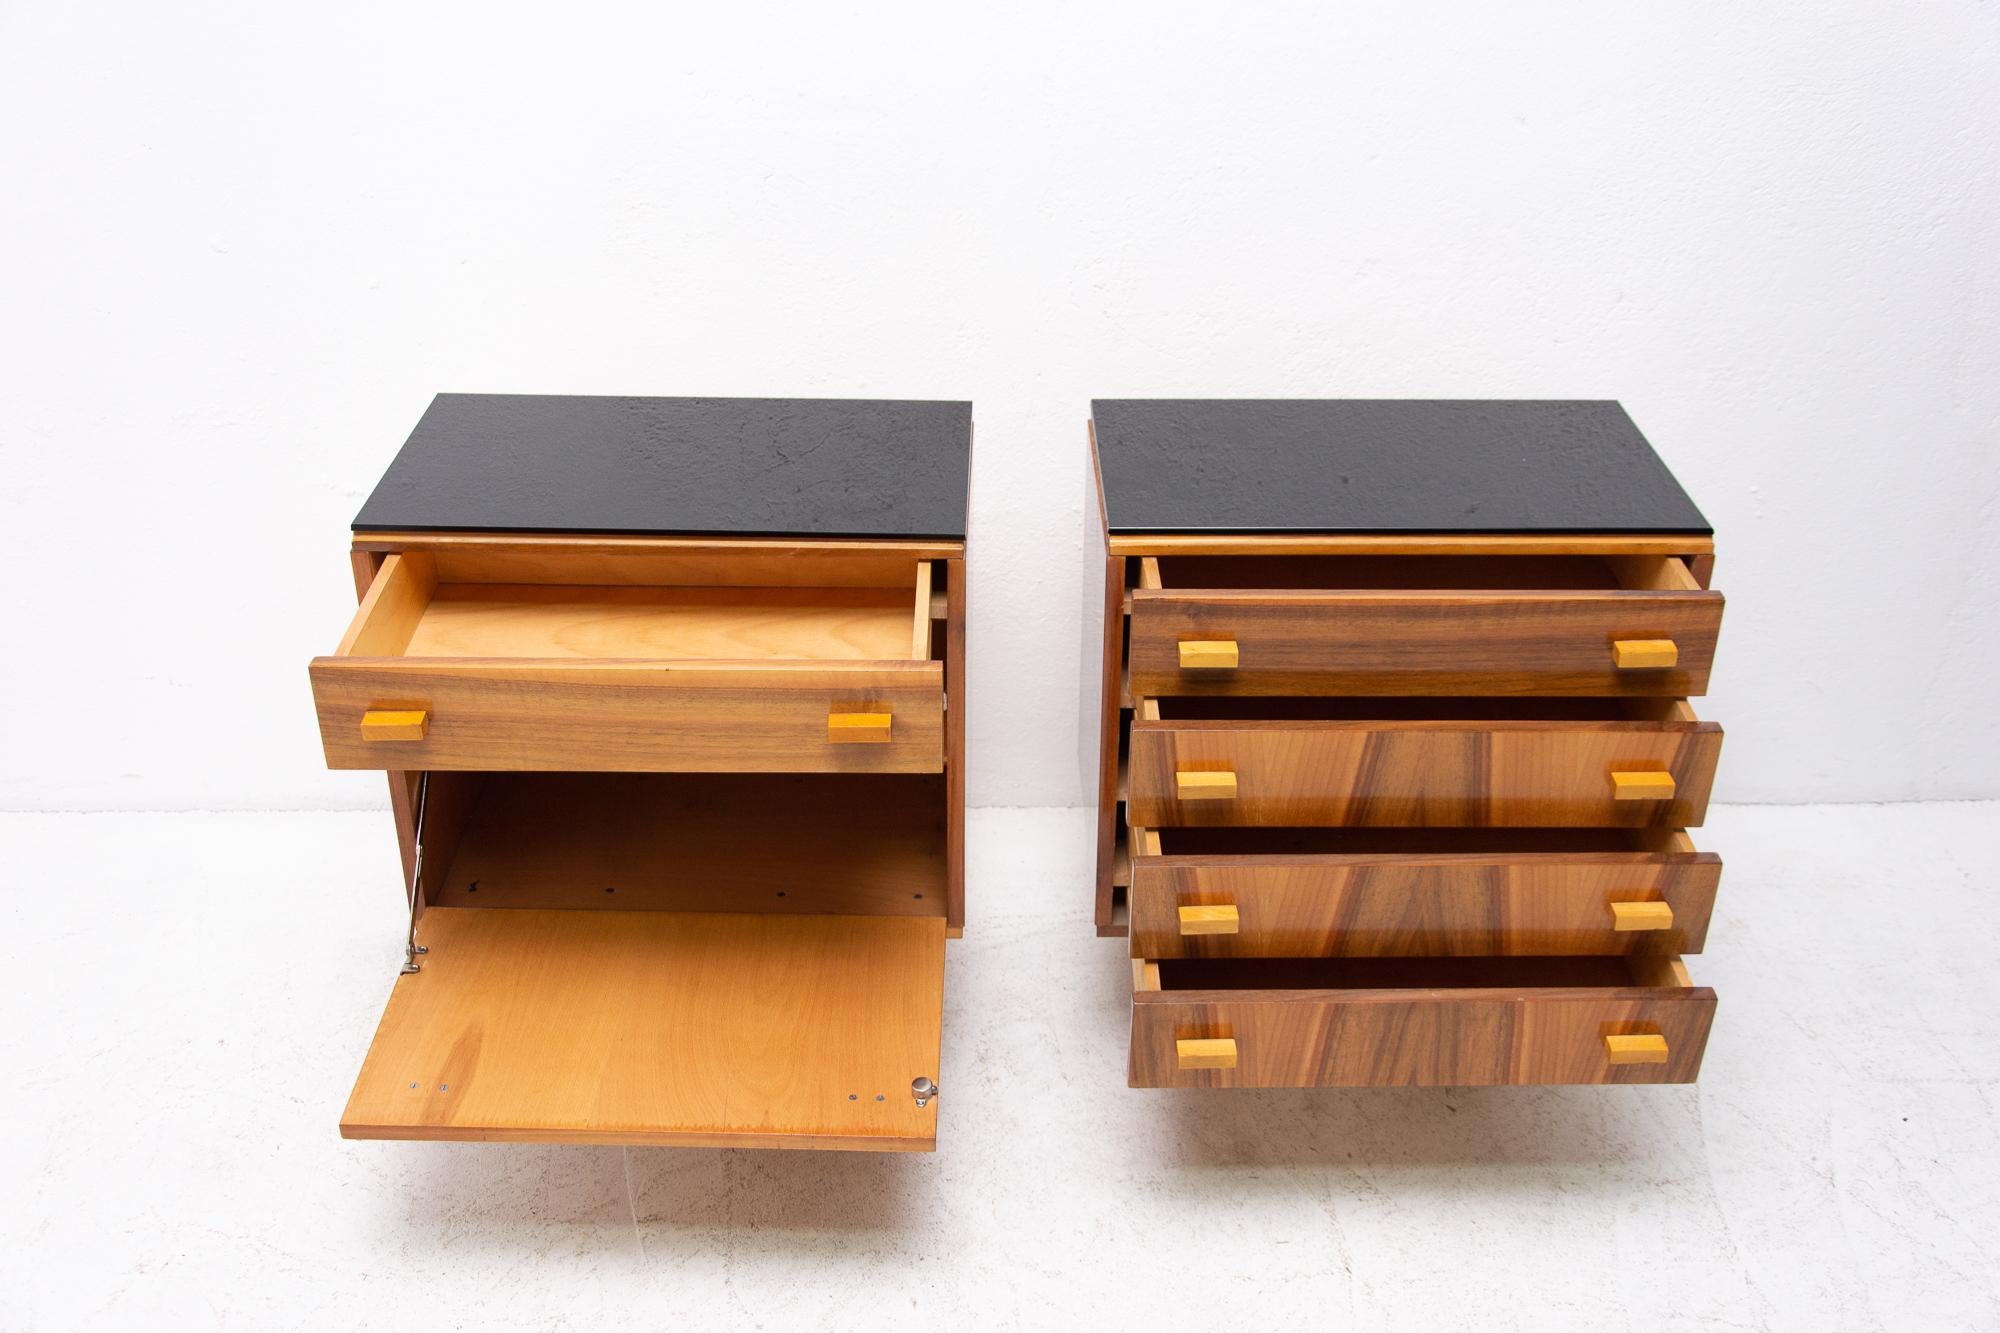 Glass Midcentury Nightstands, Chest of Drawers by Nový Domov, 1970s, Czechoslovakia